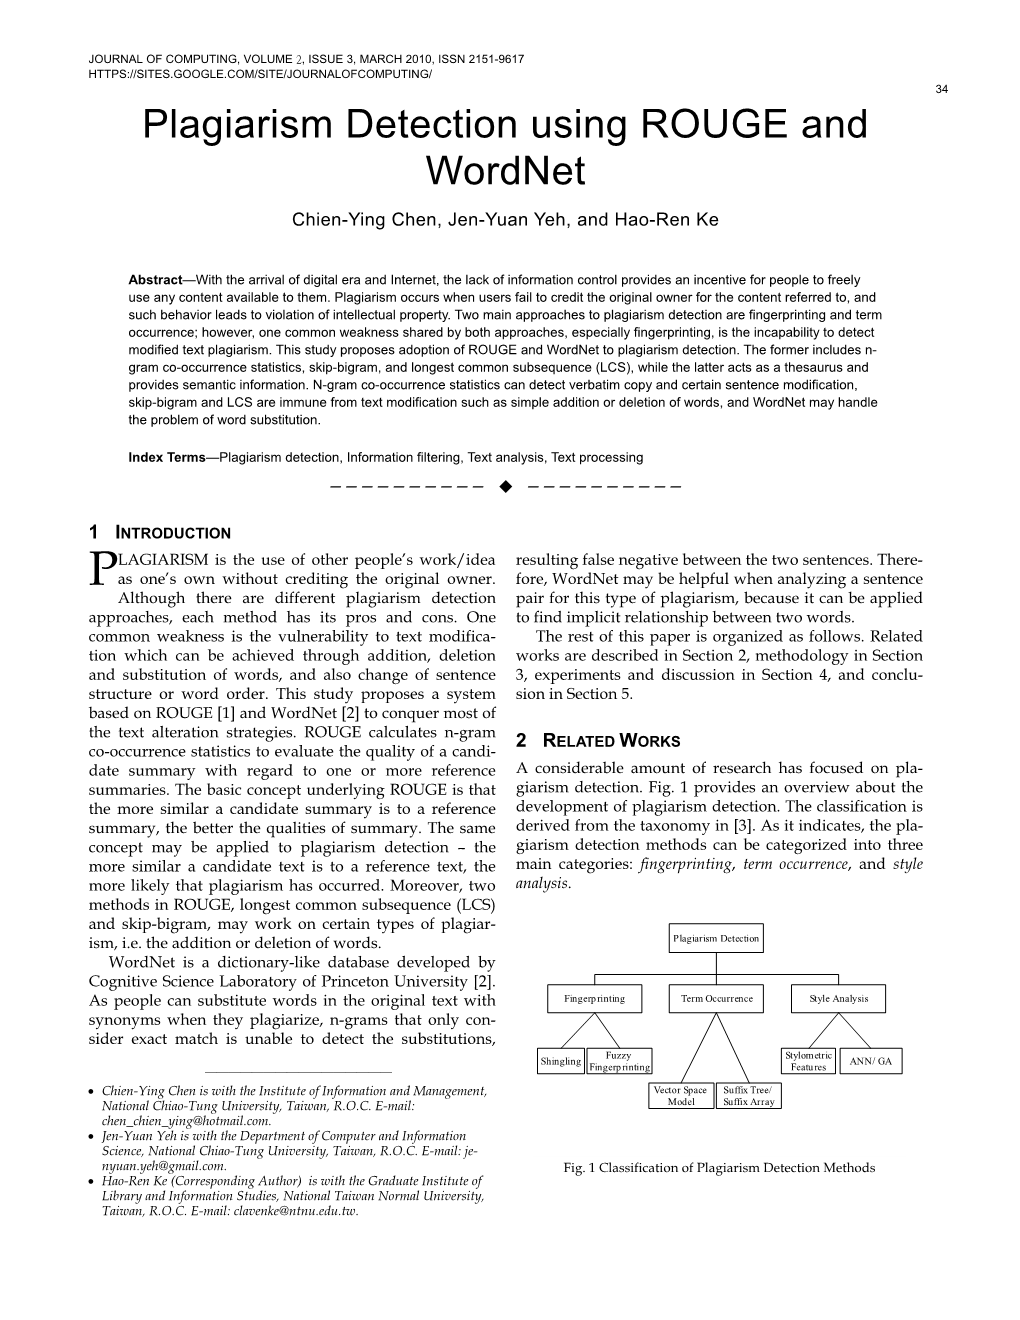 Plagiarism Detection Using ROUGE and Wordnet